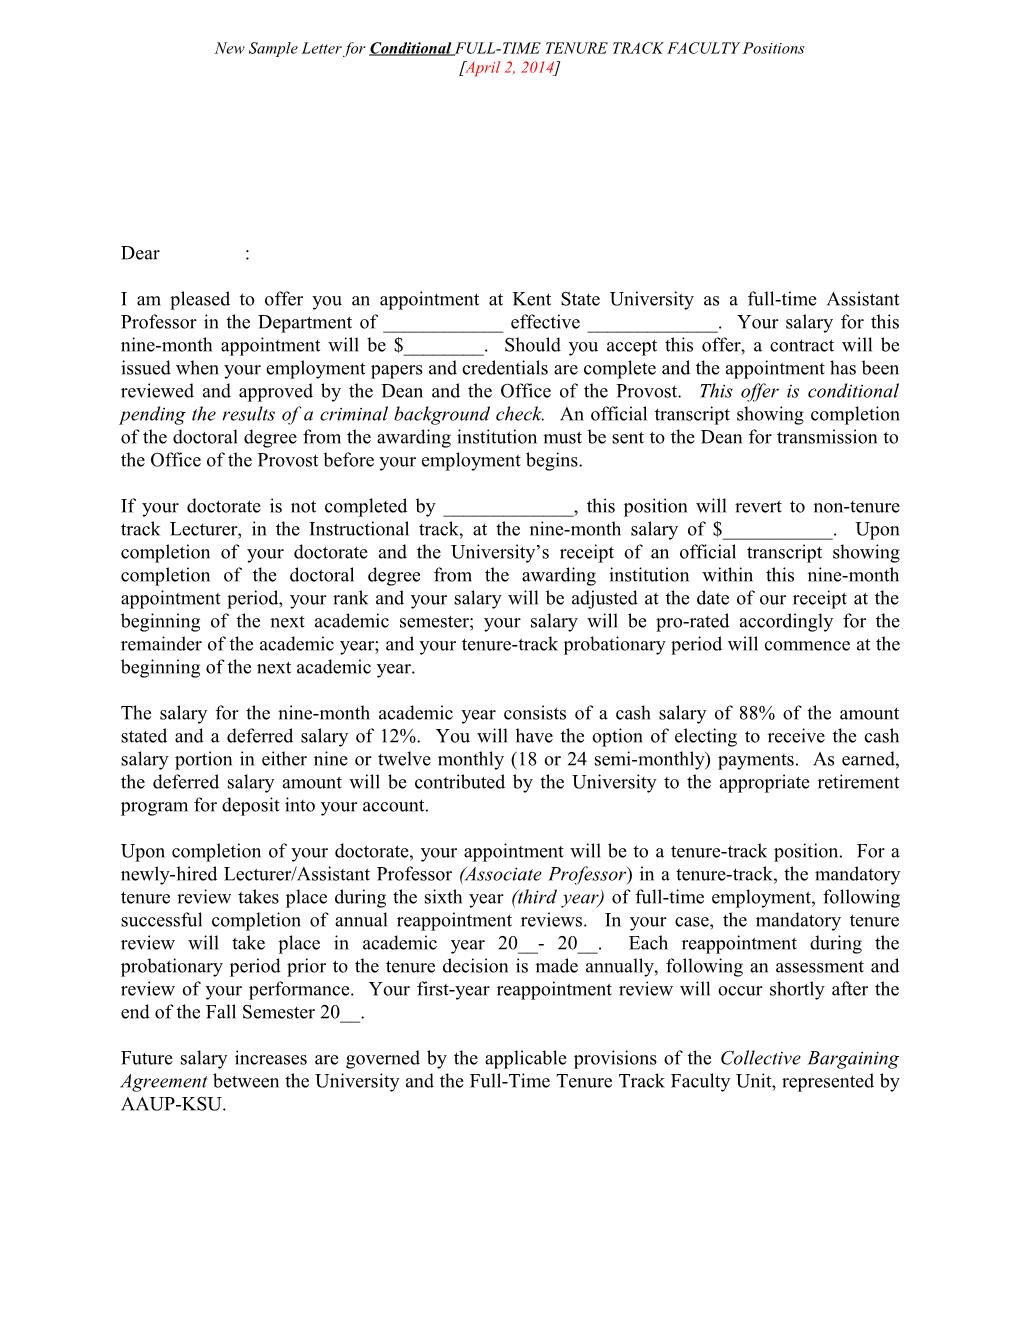 Sample Letter for Conditional FULL-TIME TENURE TRACK FACULTY Positions